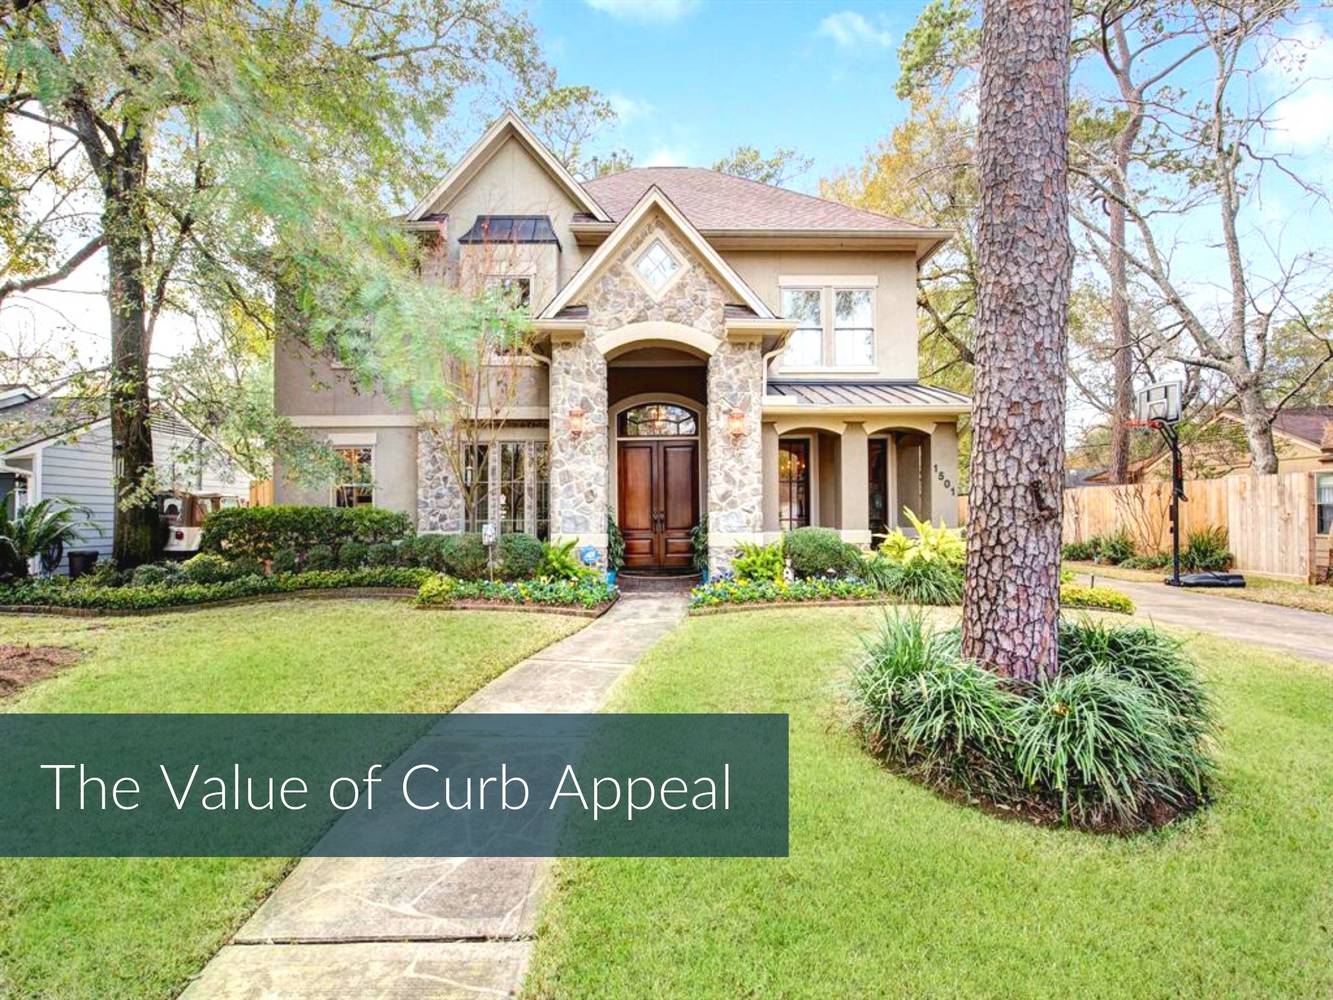 Improve Your Home’s Curb Appeal